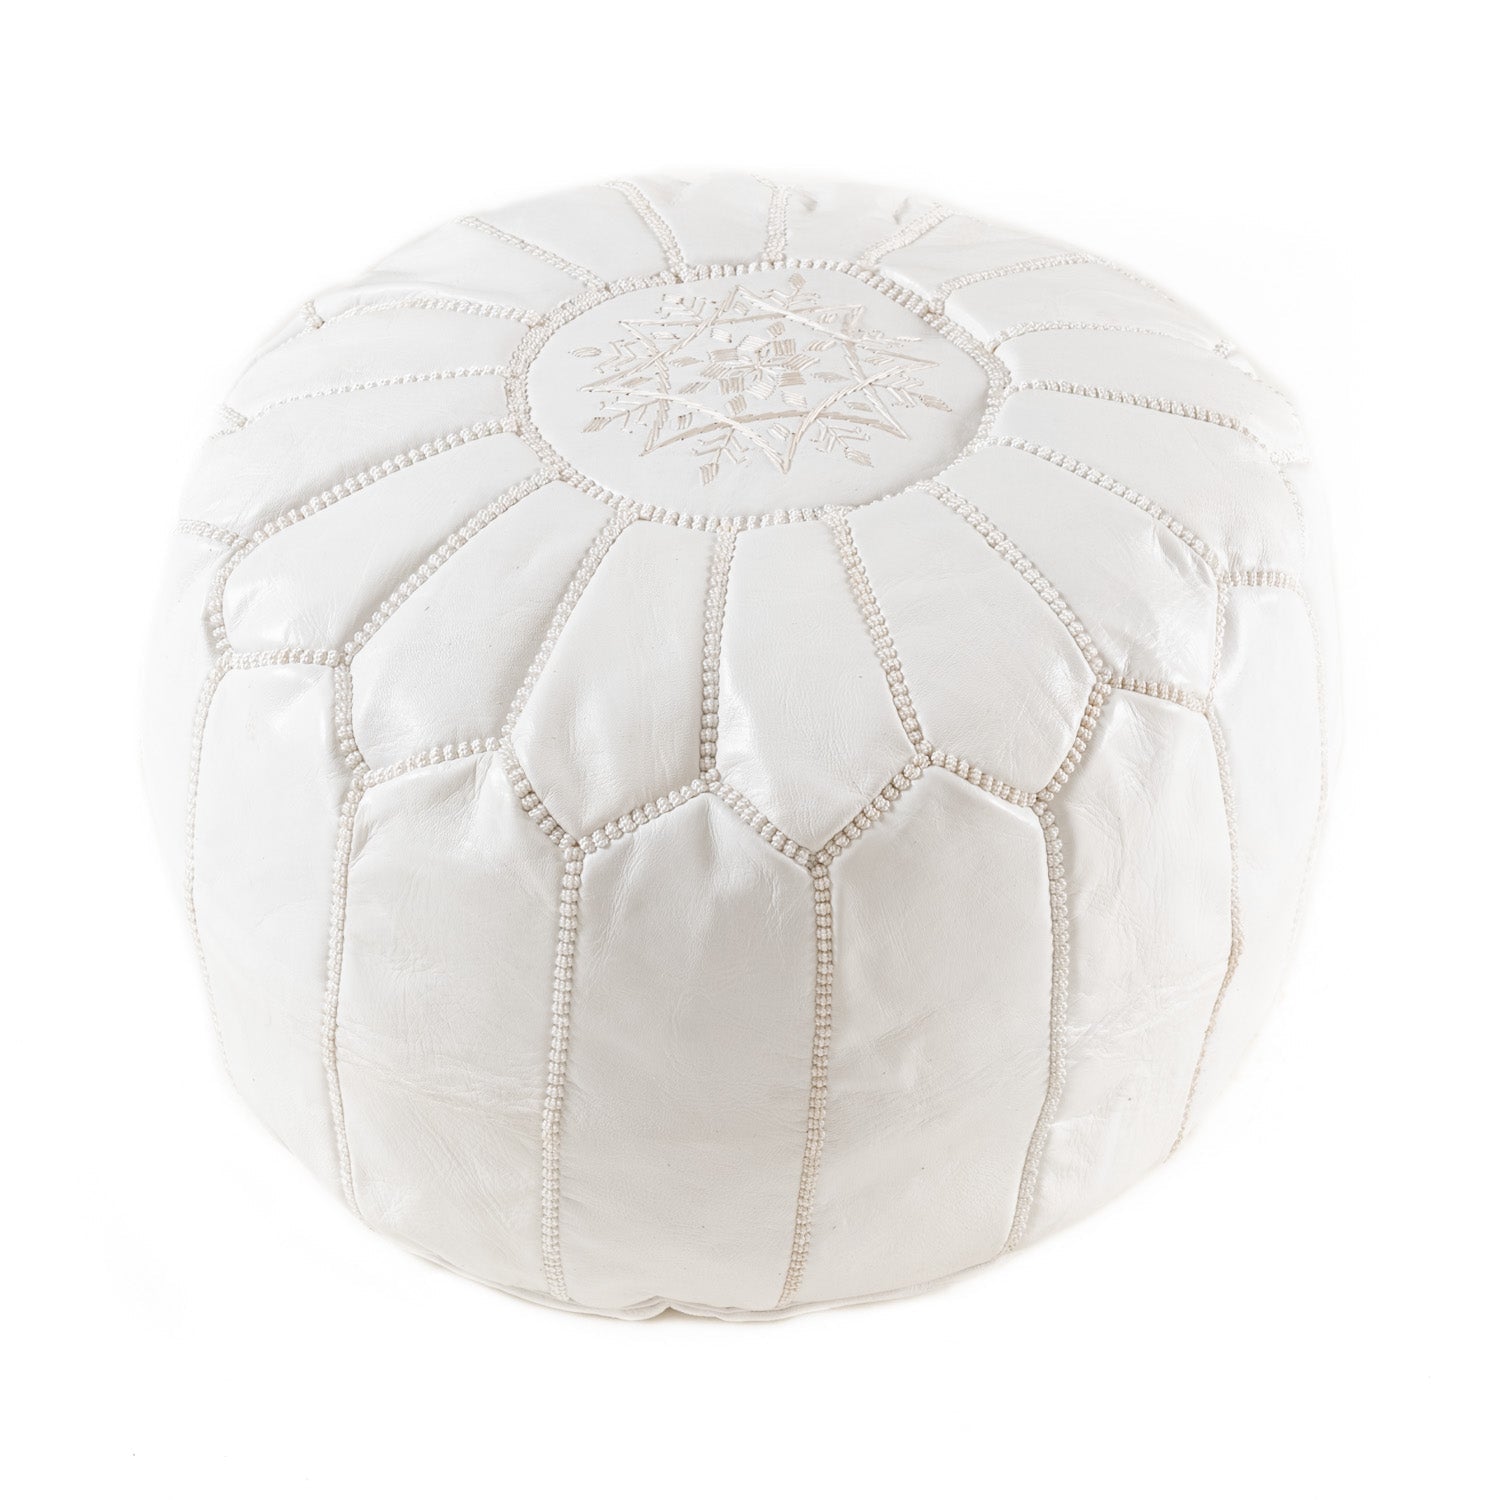 Authentic Moroccan Leather Pouf - White - Benisouk